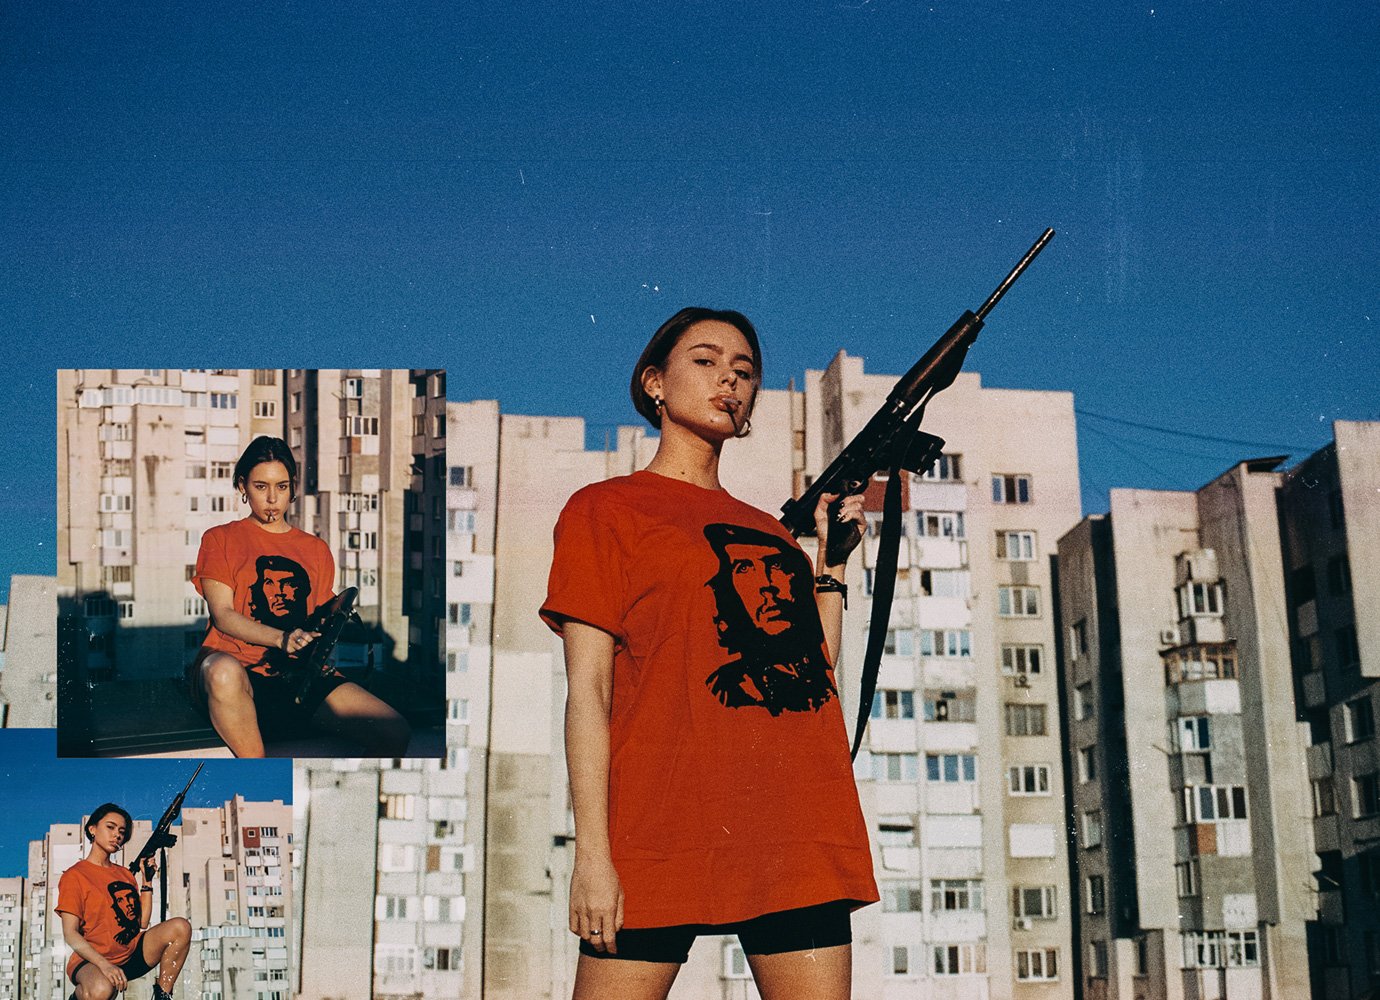 MTV glamour and Soviet stereotypes: a Moldovan photographer comes to grips with his country